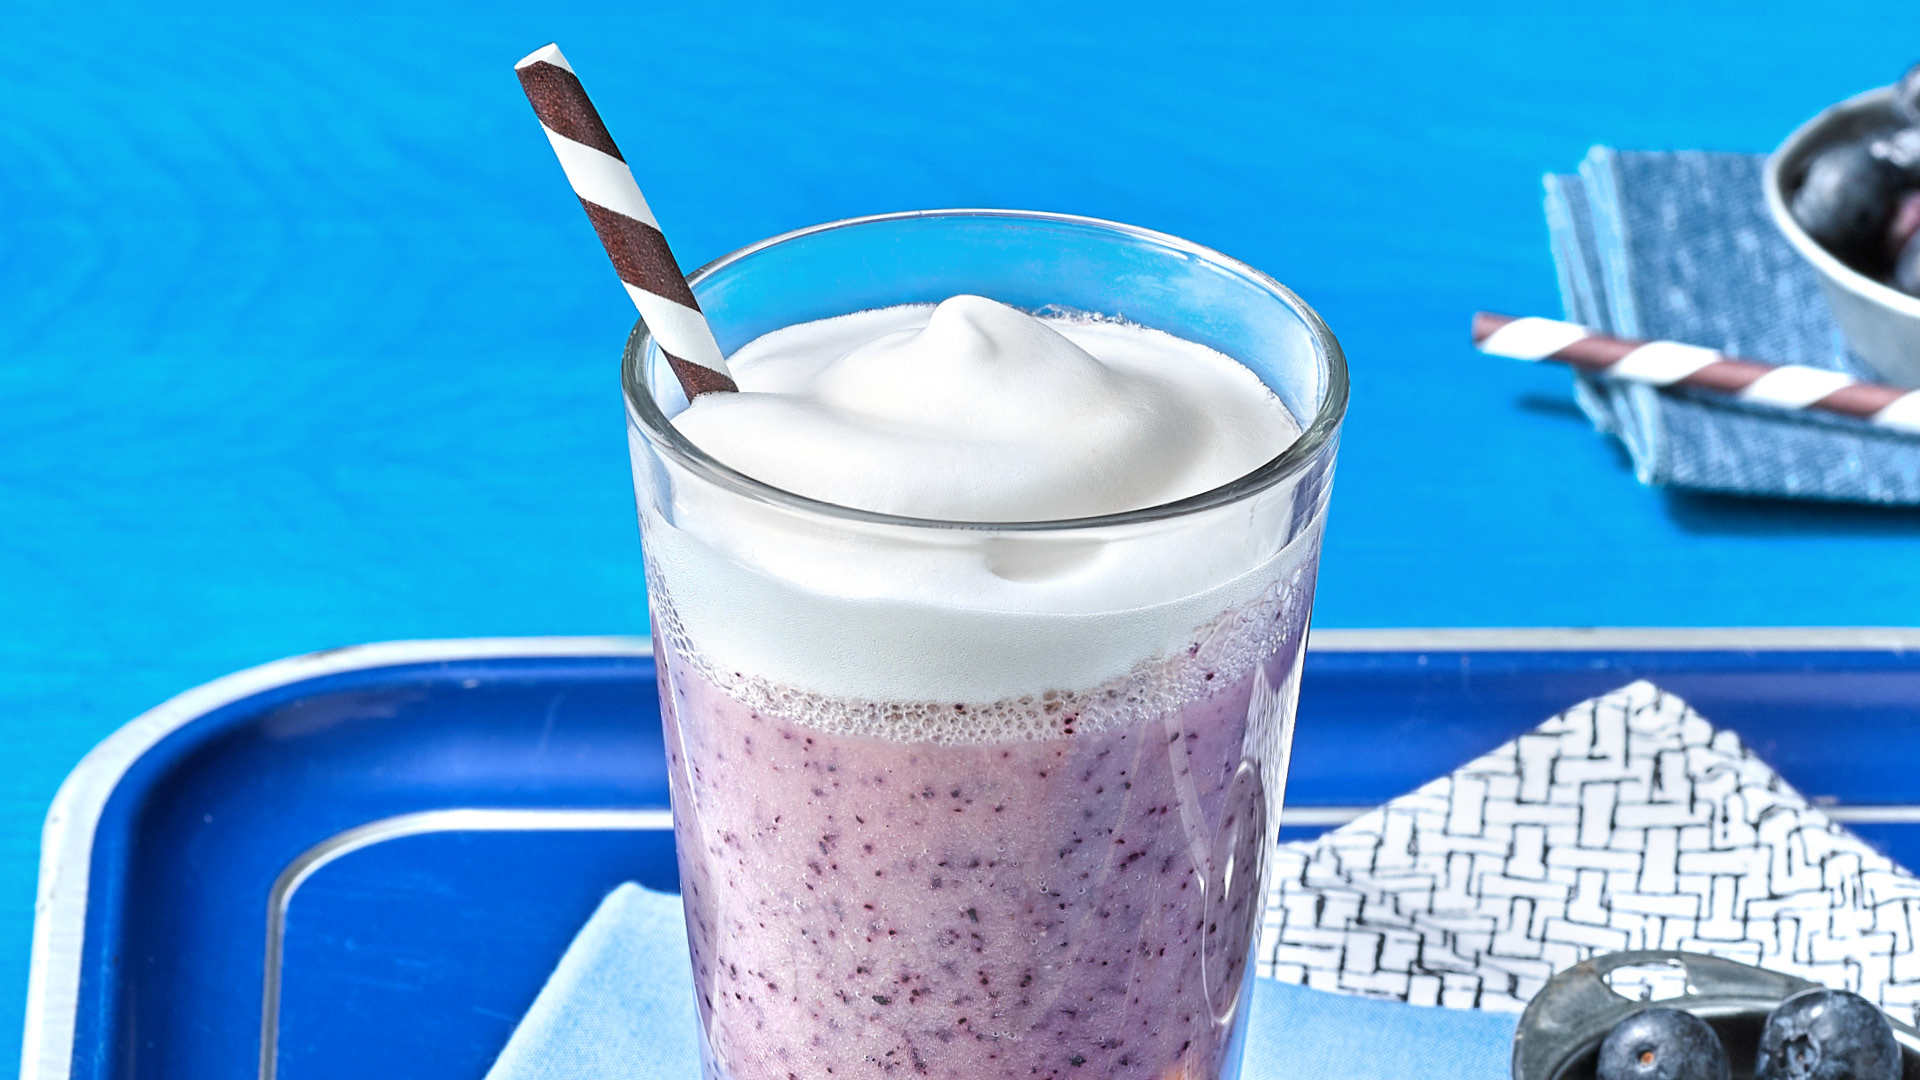 Purple Bean Smoothie featured on a blue tray with a blue background.